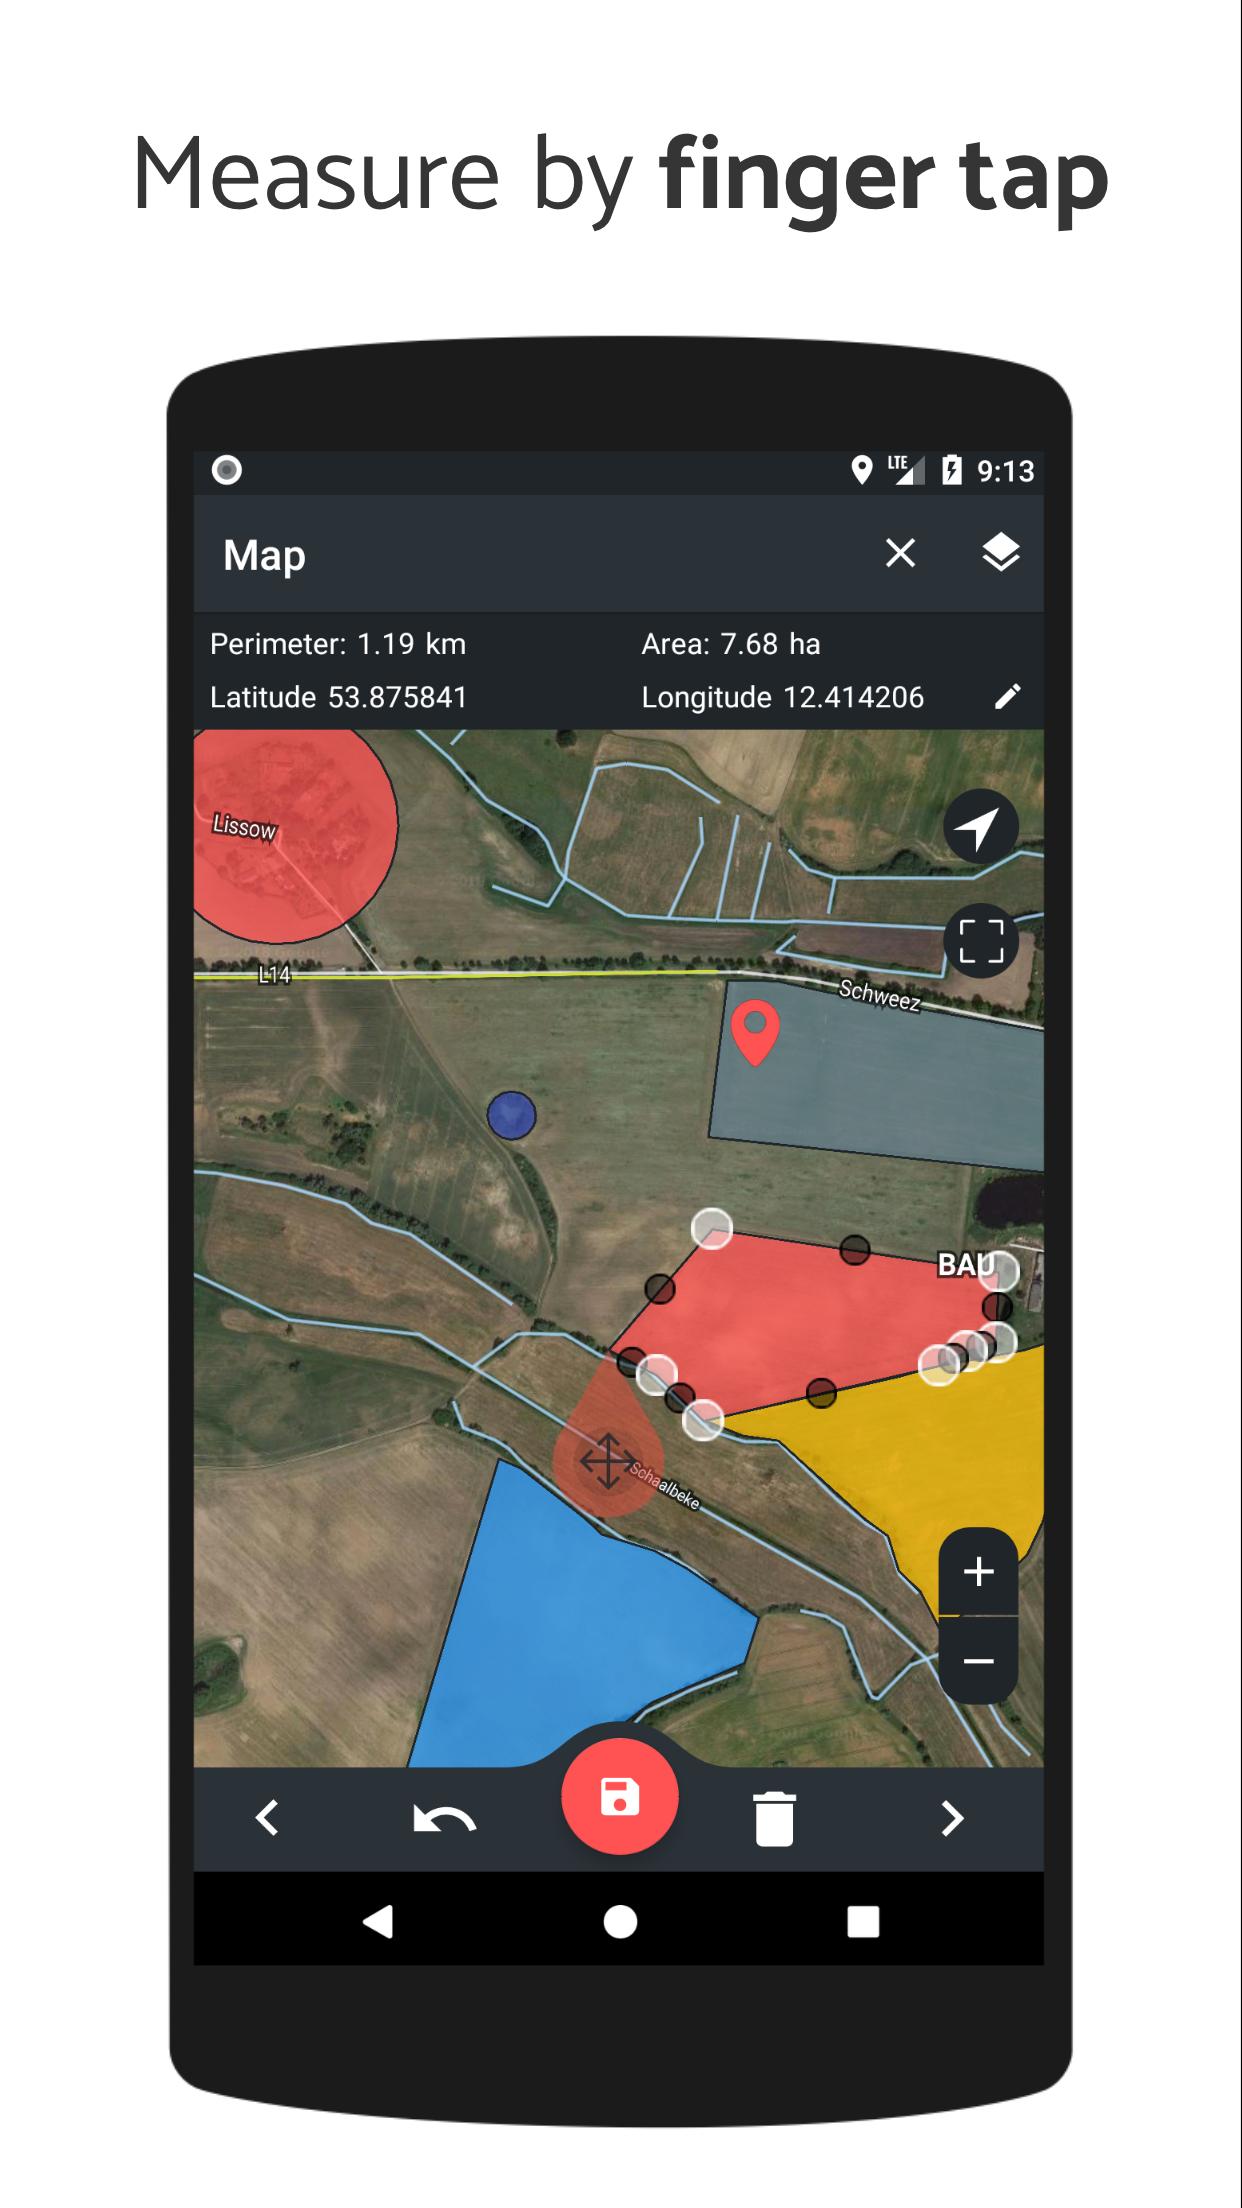 GPS Measurer - Area, Perimeter, Distance, POI for Android - APK Download